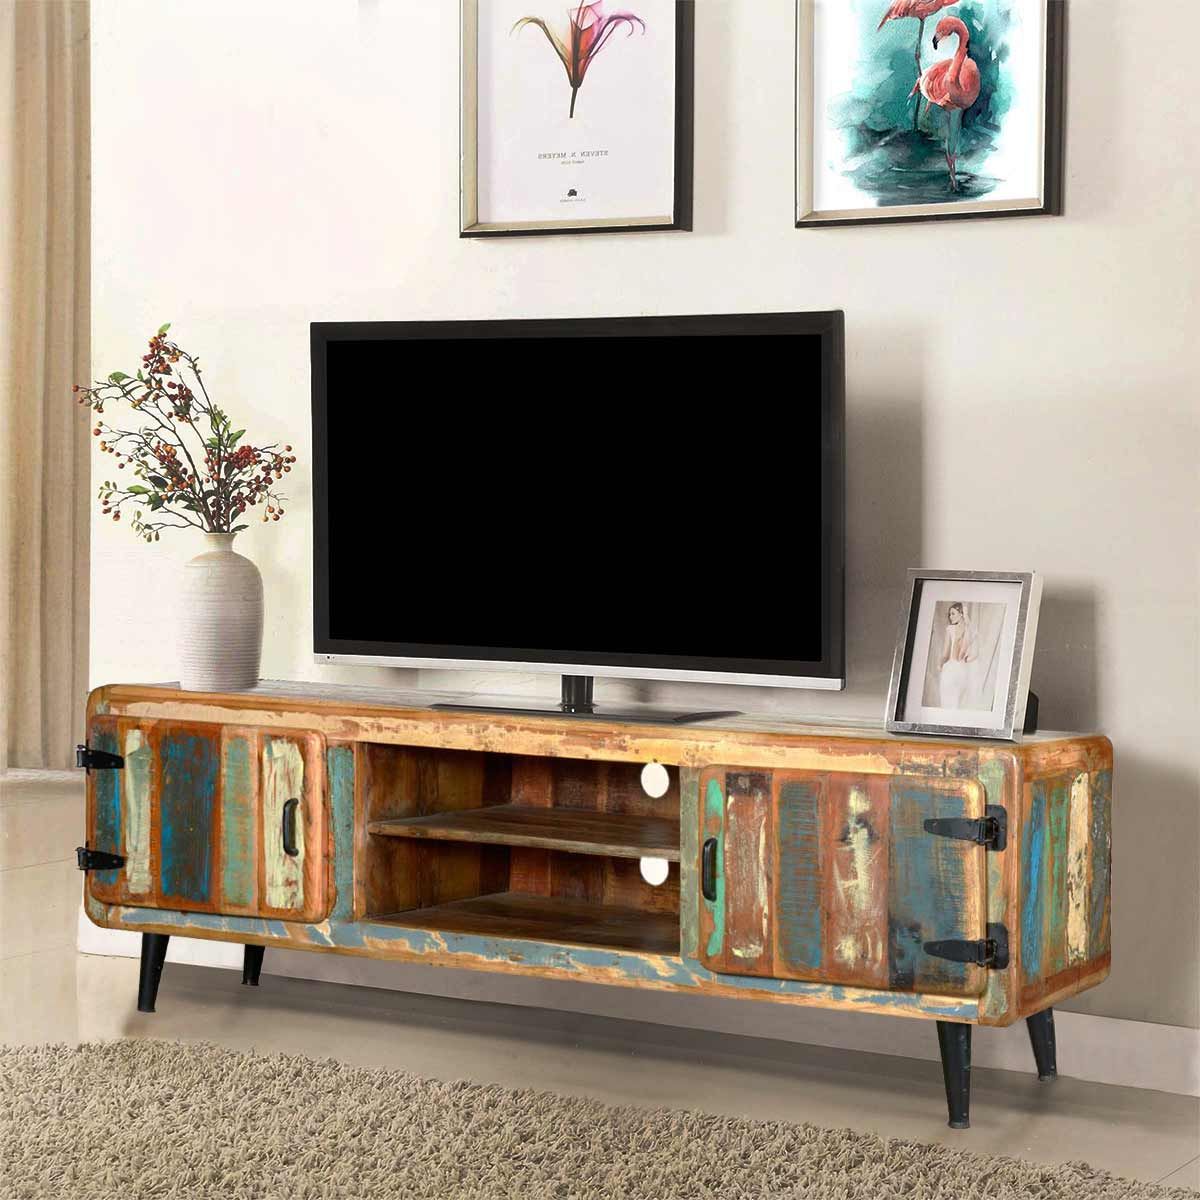 Reclaimed Vintage Tv Stands Pertaining To Most Up To Date Medway Retro Reclaimed Wood Large Tv Media Console W Center Shelves (View 9 of 10)